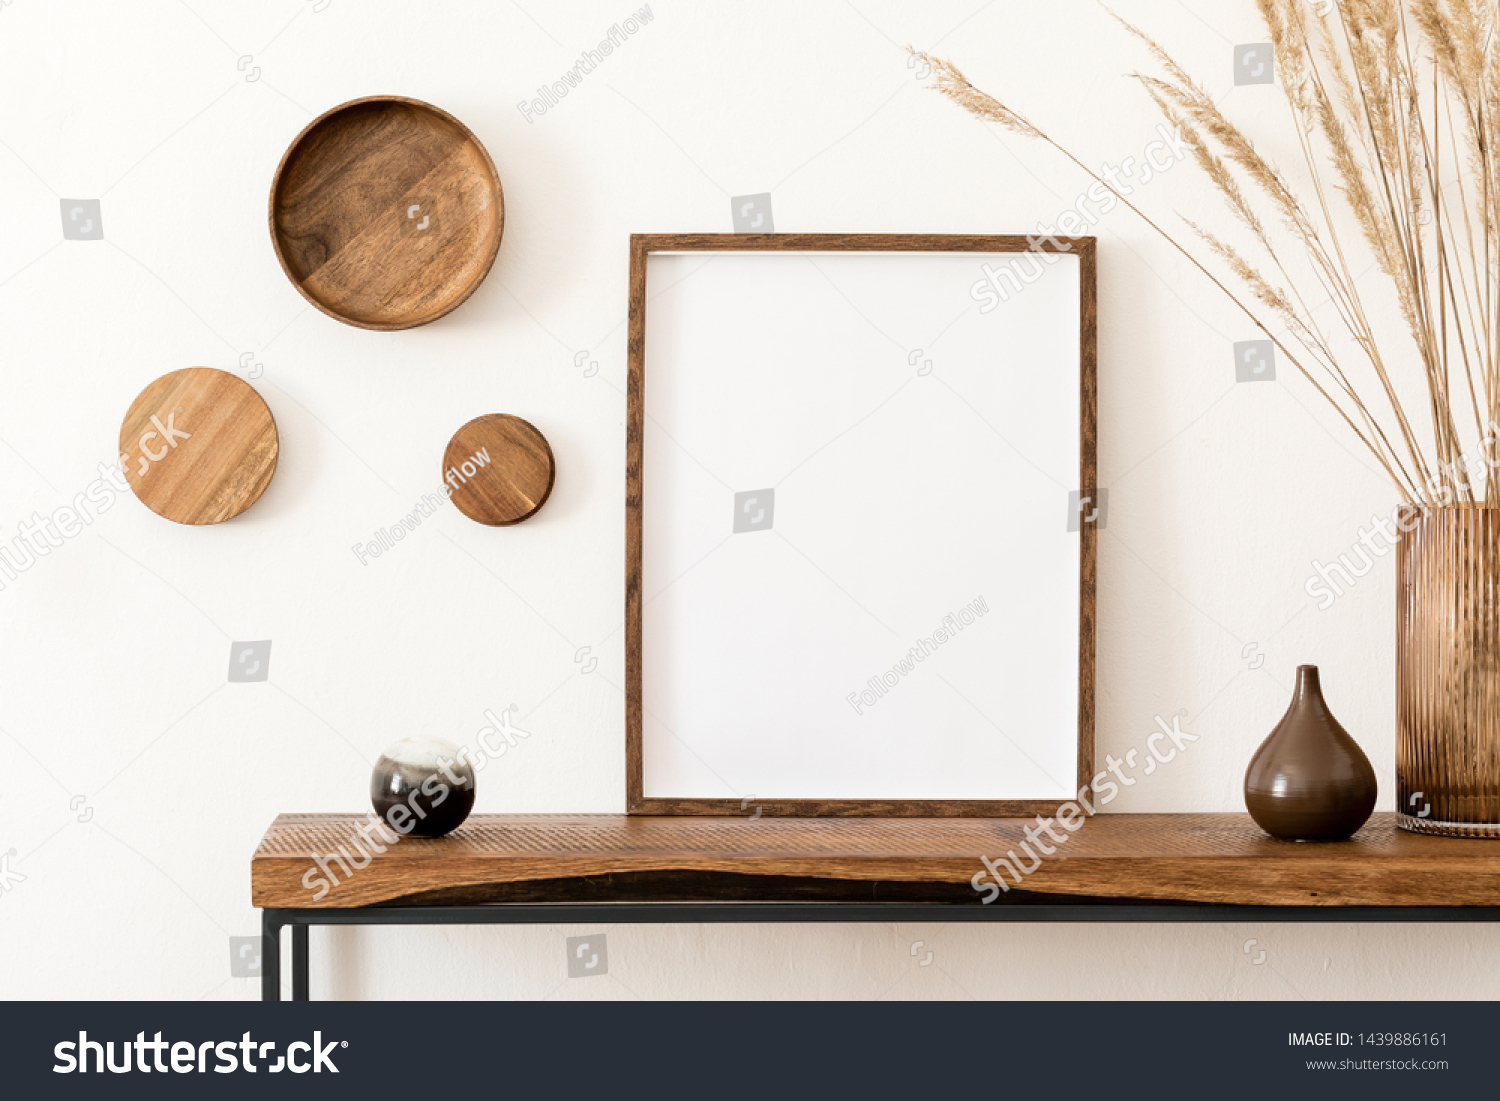 Design scandinavian interior of living room with wooden console, rings on the wall, mock up poster frame, flowers in vase and elegant personal accessories. Modern home decor. Template. #1439886161